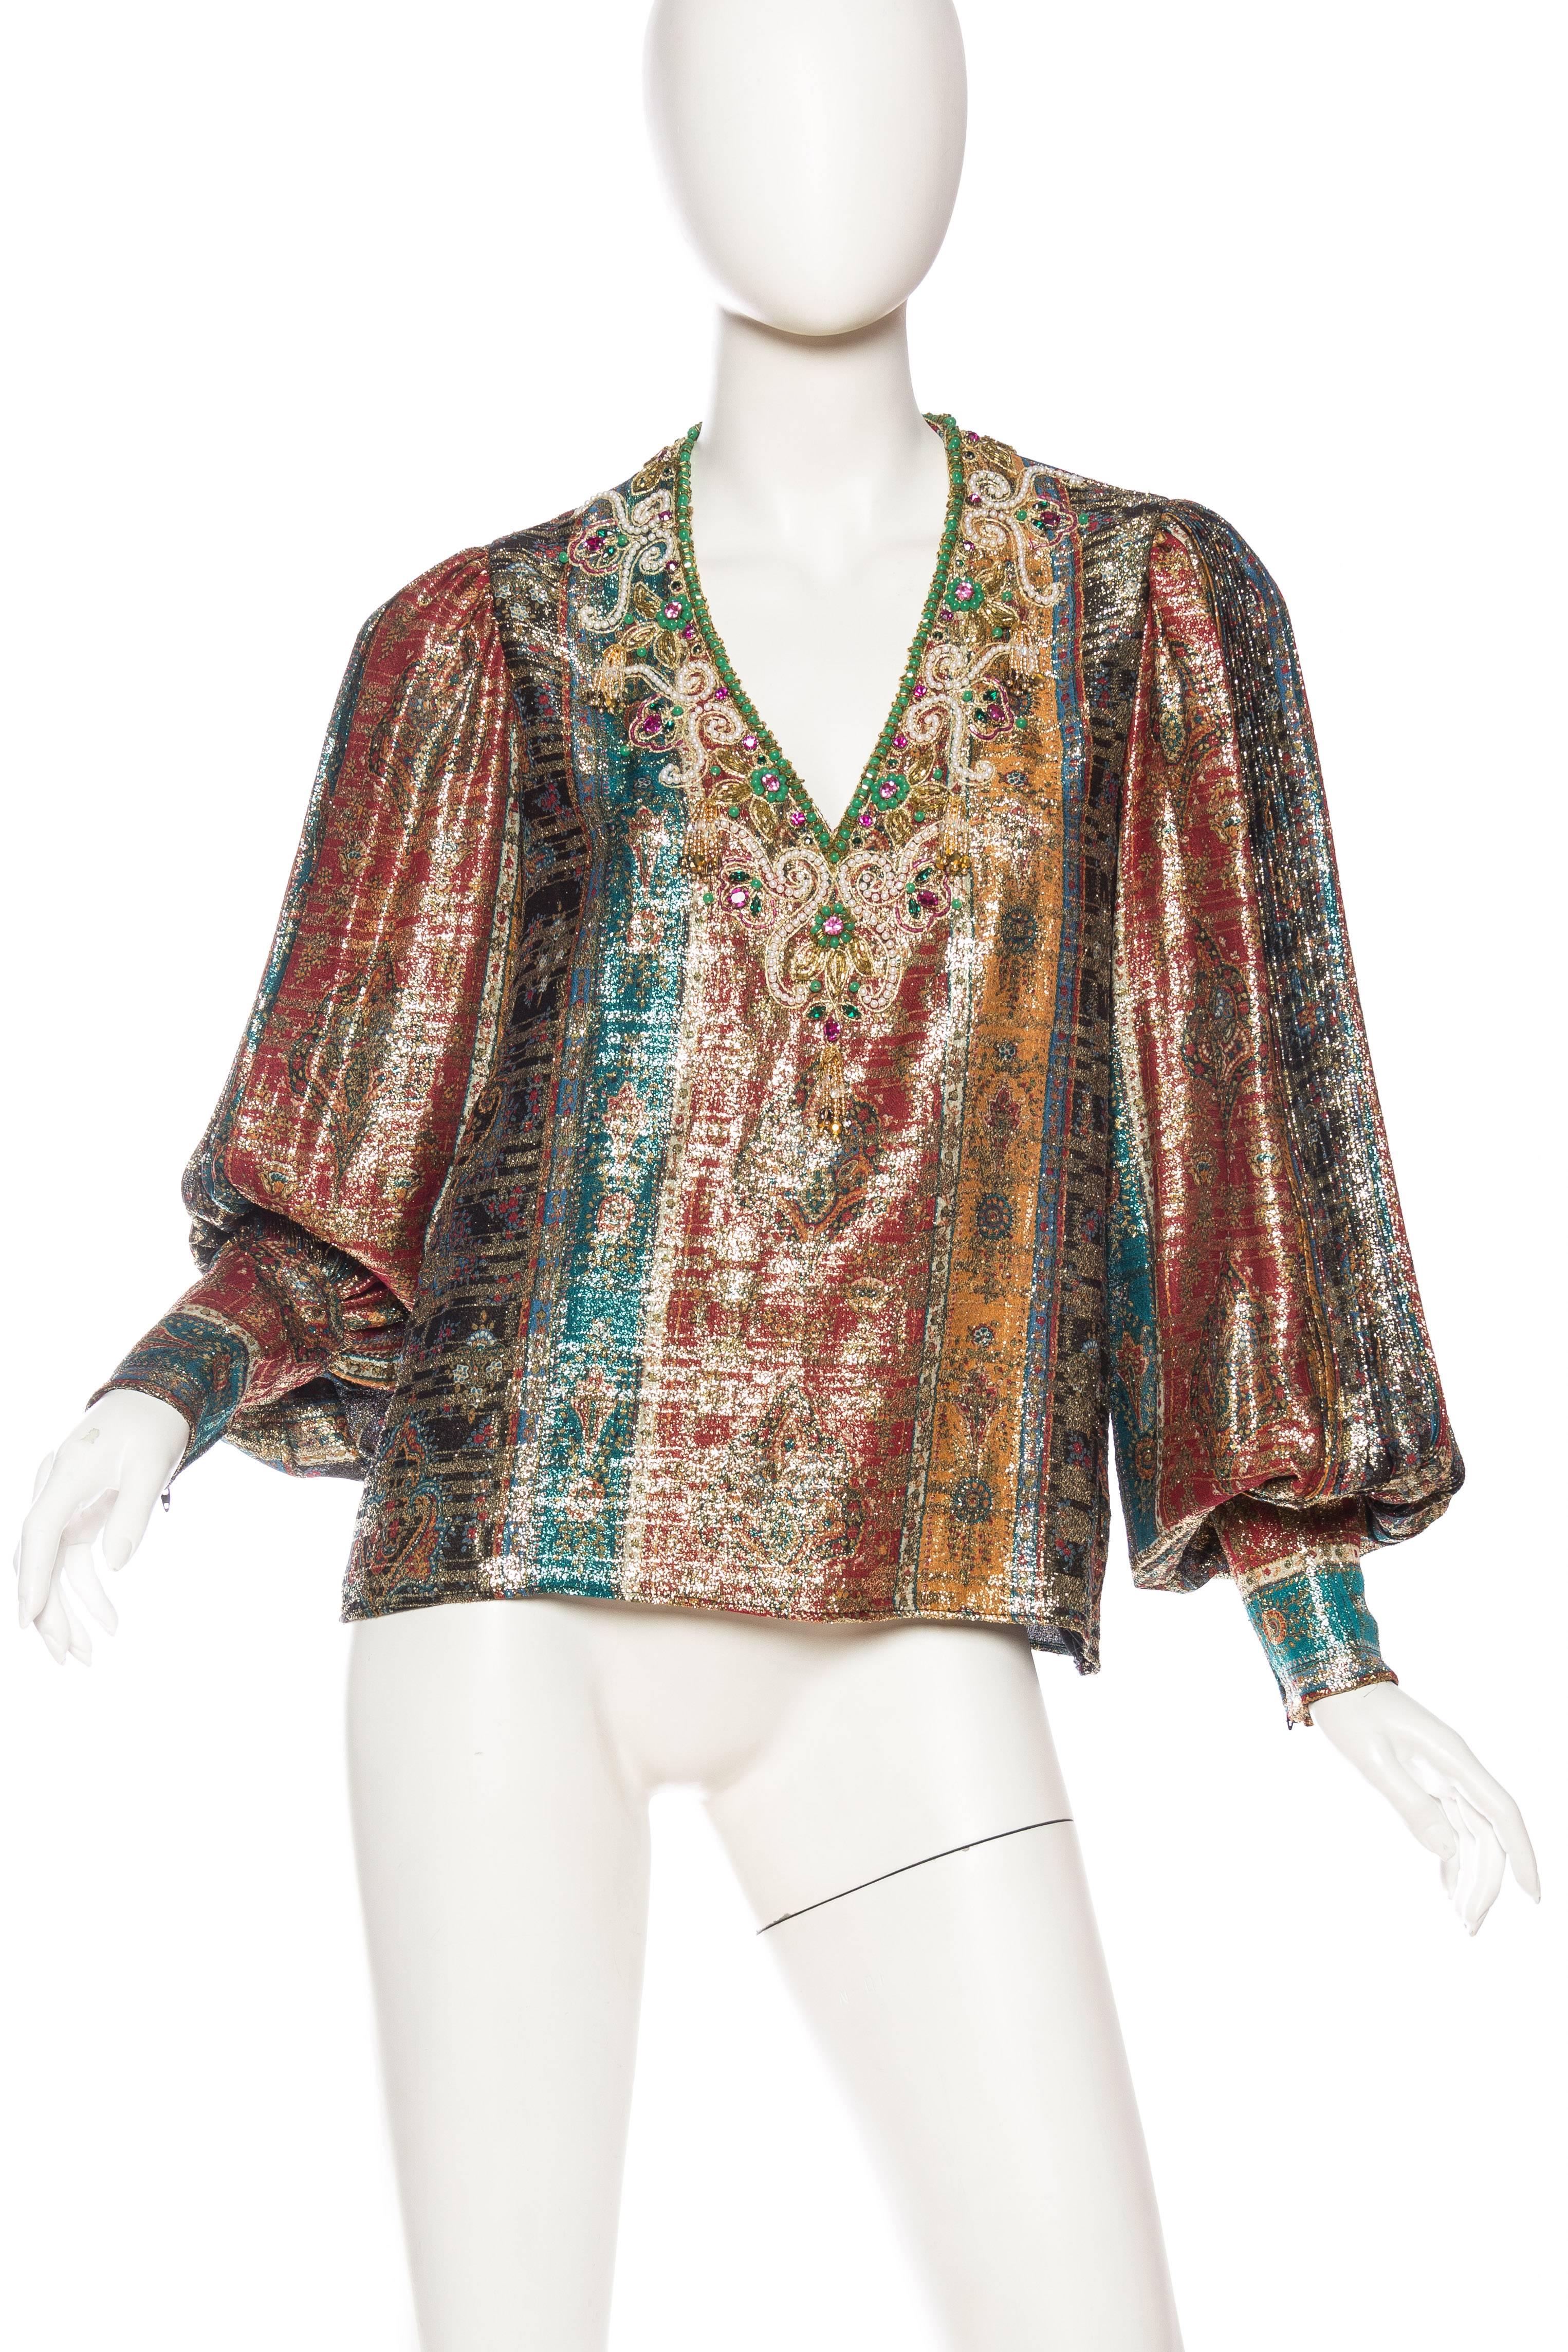 1970s Oscar De La Renta Indian Inspired Metallic Blouse Beaded with Crystals and Pearls